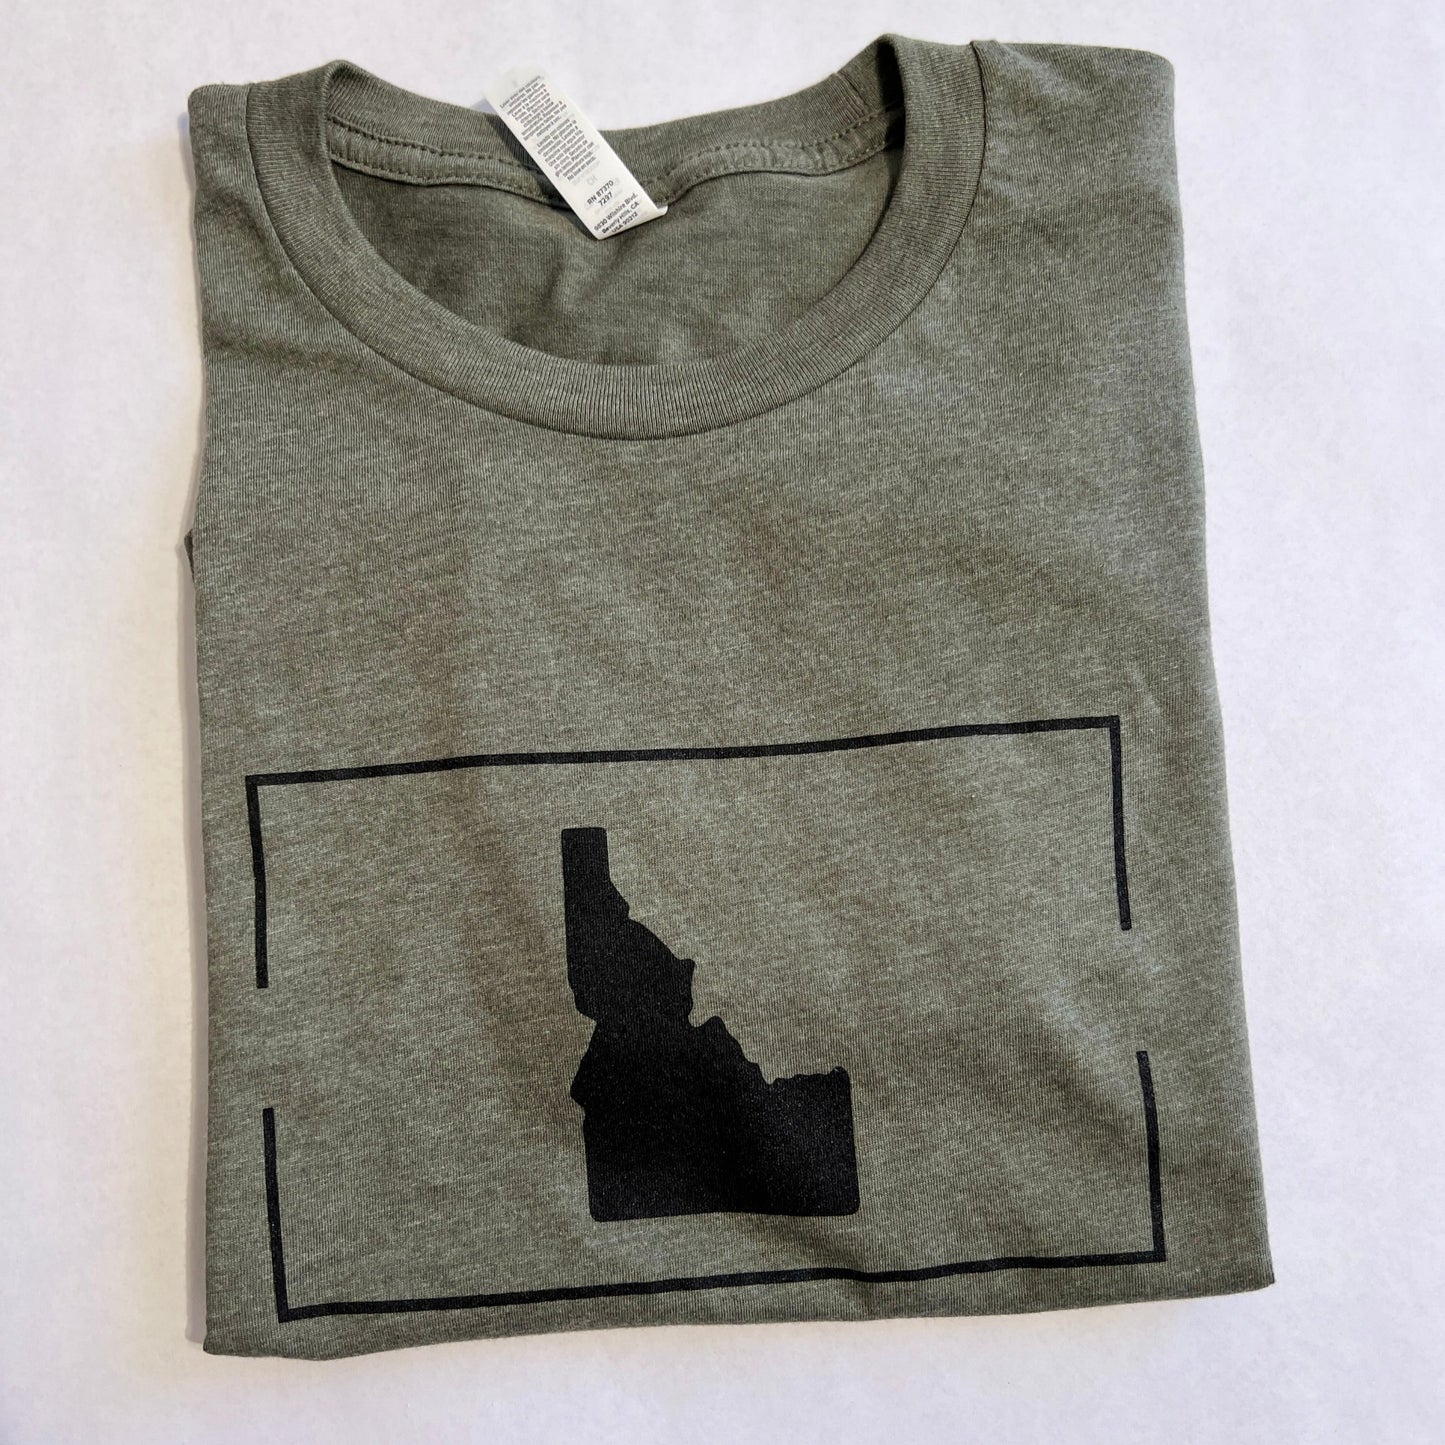 This Idaho T shirt is a classic design. It is simple and clean, showcasing the love for Idaho on it. This Idaho apparel piece is designed and screen printed in Idaho. This military green is a unisex shirt, both men and women can wear Idaho t shirts wherever they go!